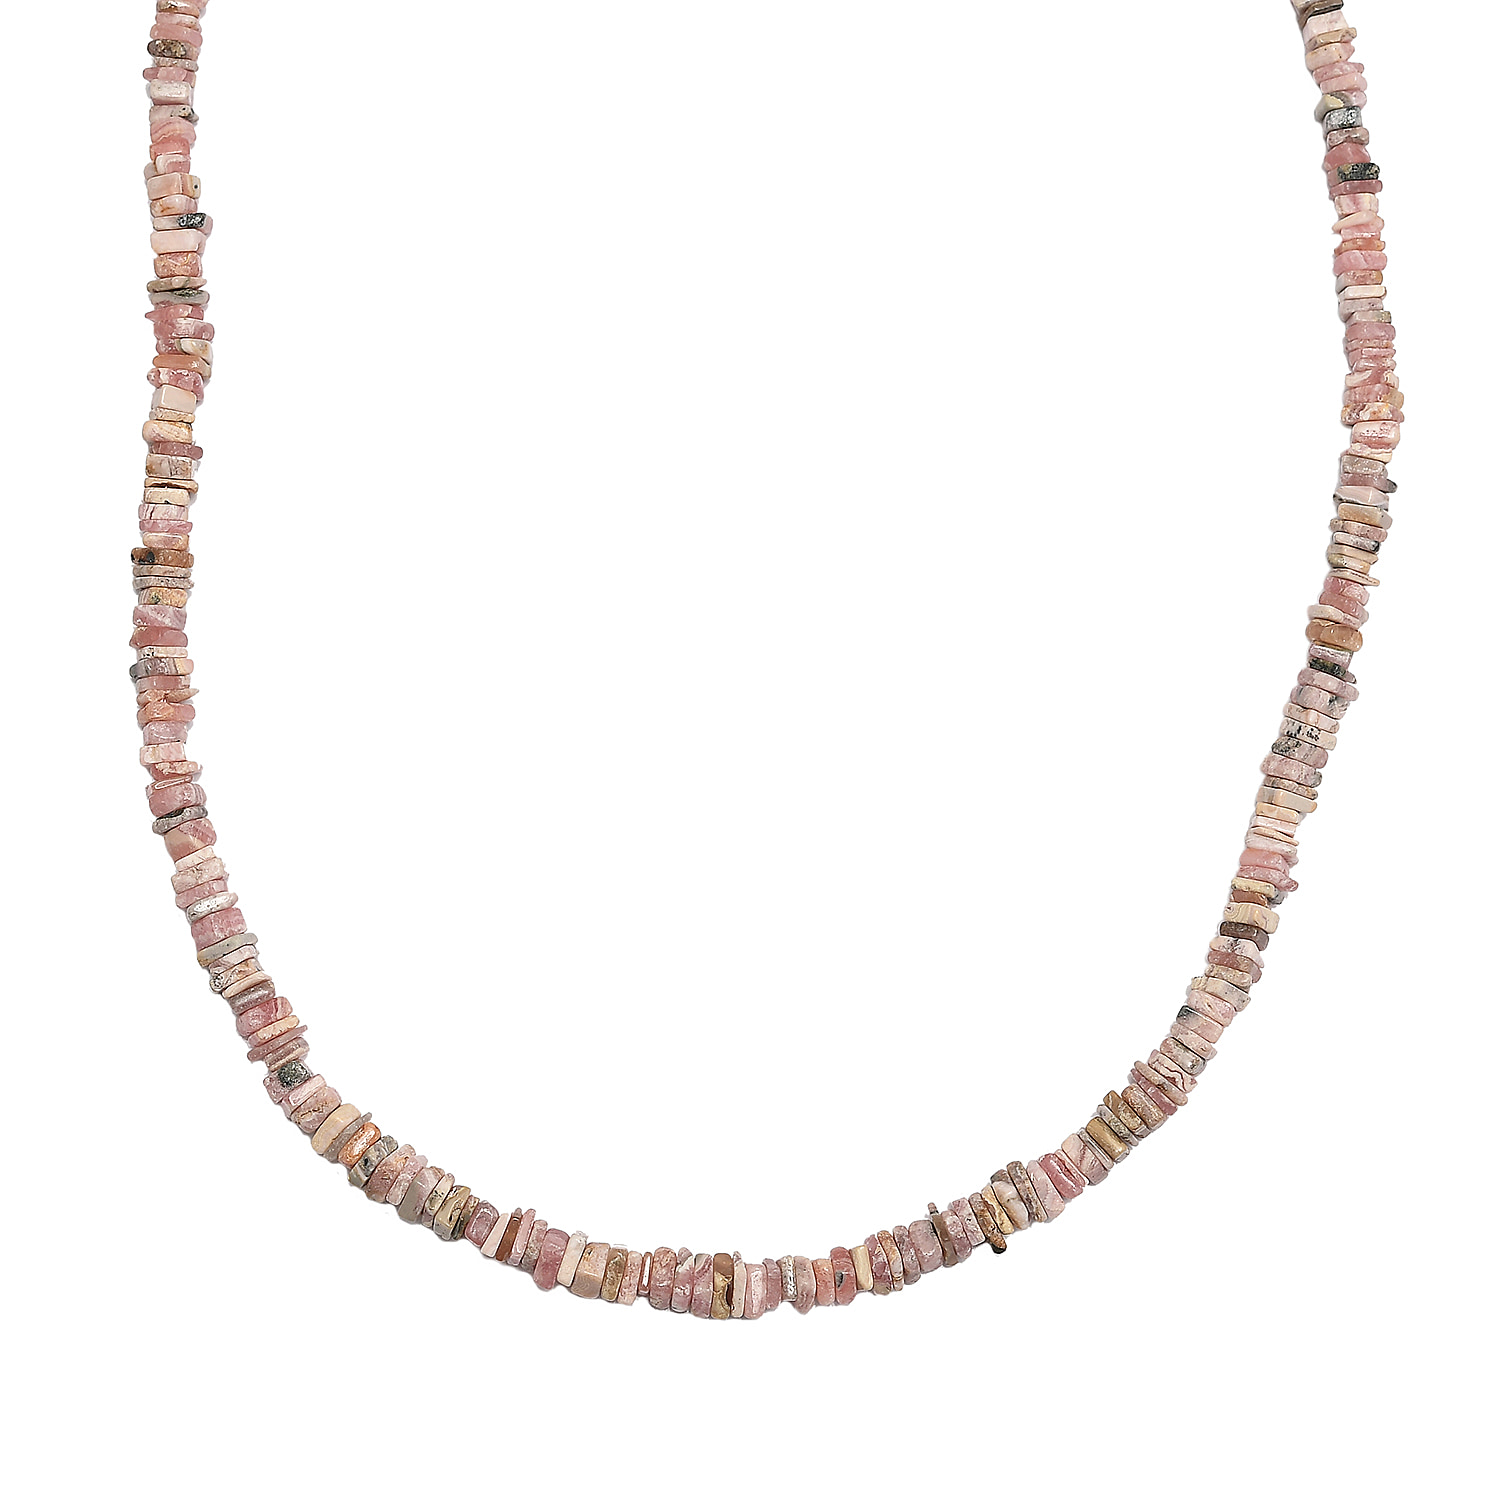 Rhodochrosite Beads Necklace (Size - 20) in 18K Vermeil Yellow Gold Plating Sterling Silver 145.00 ct 145.000 Ct.